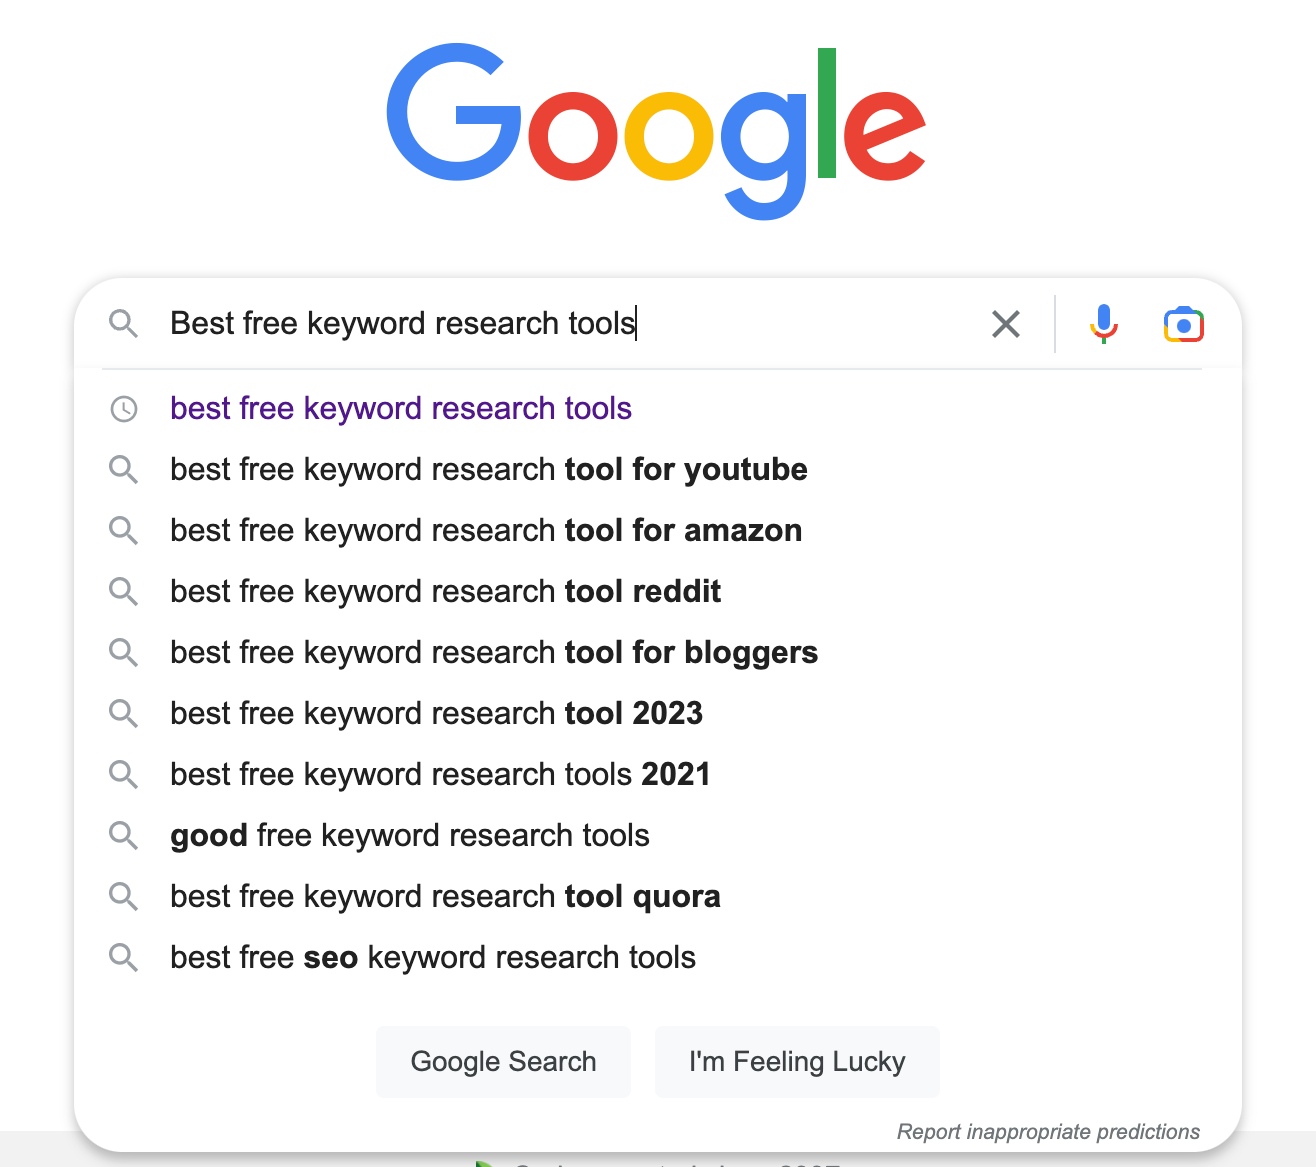 Best free keyword research tools: Google Search data.